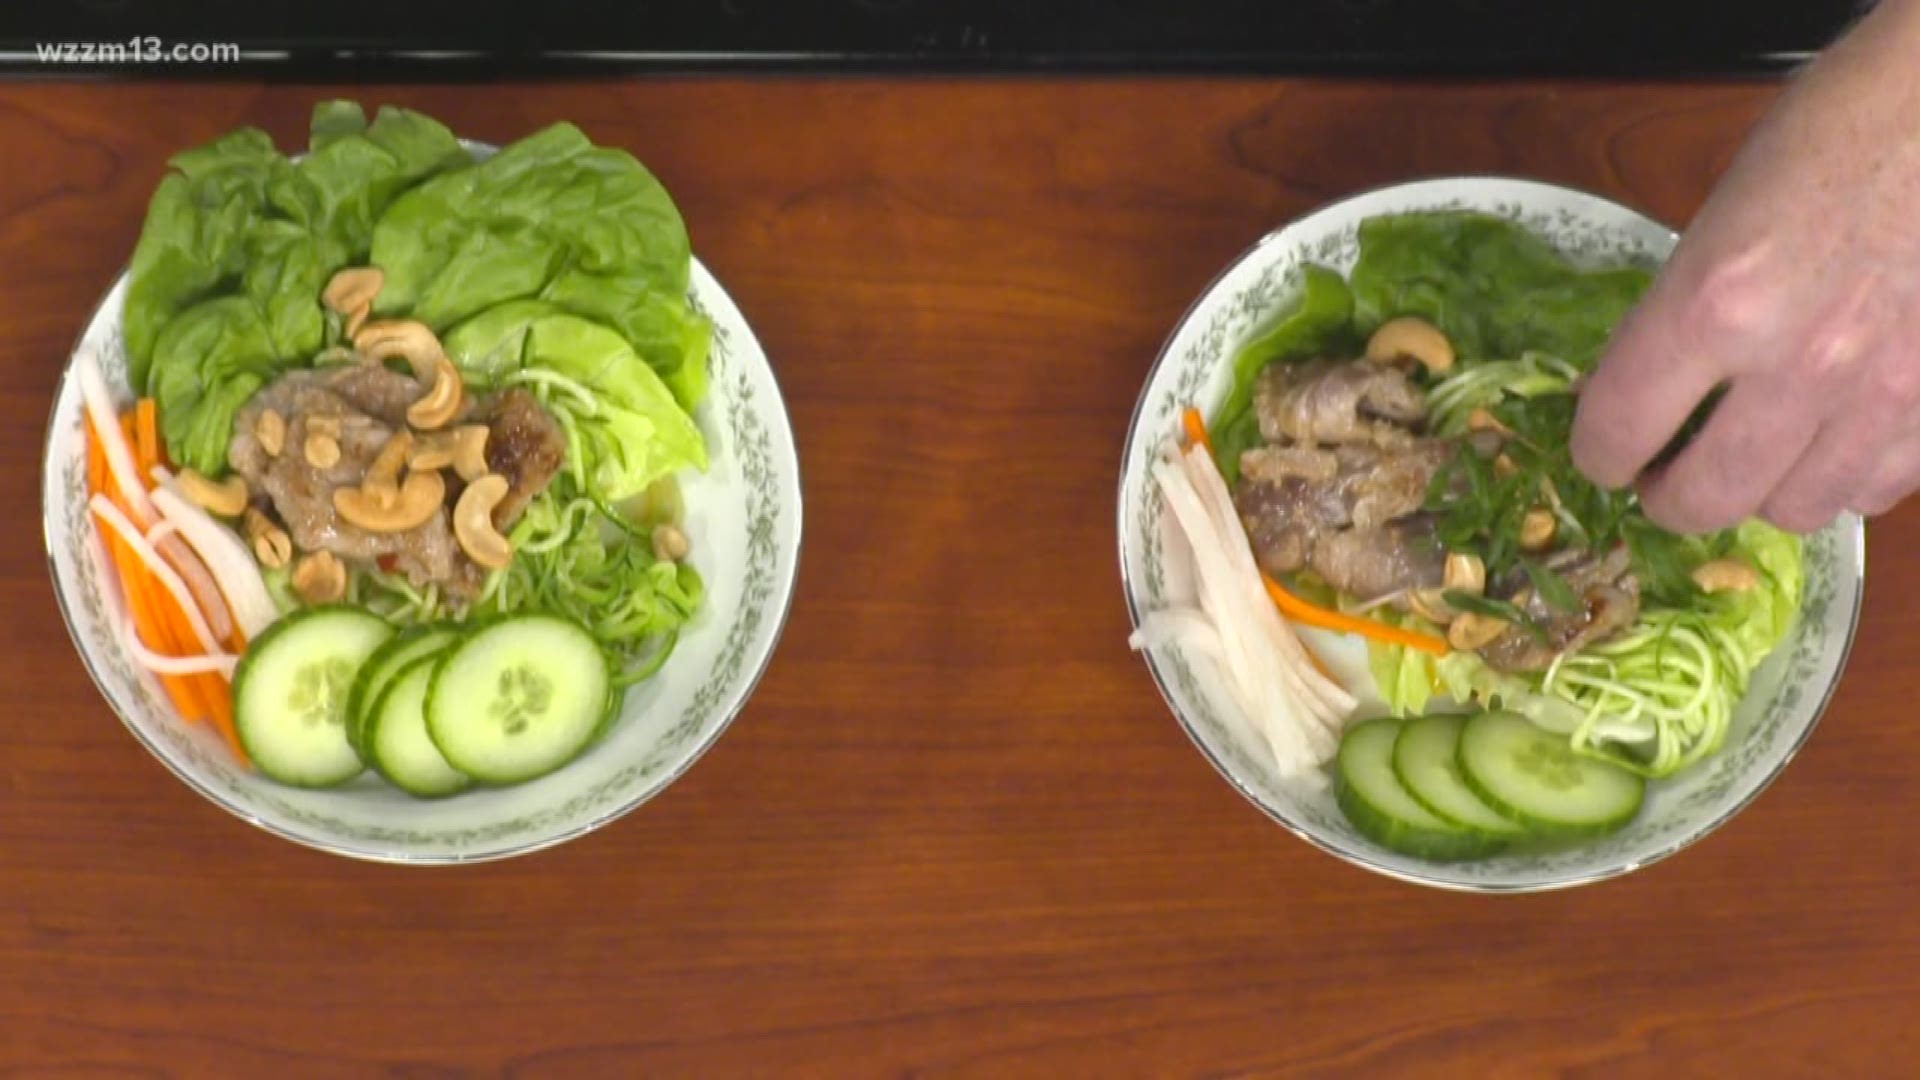 Check out this grilled pork Vietnamese dish with Chef Mark in today's edition of Better Bites